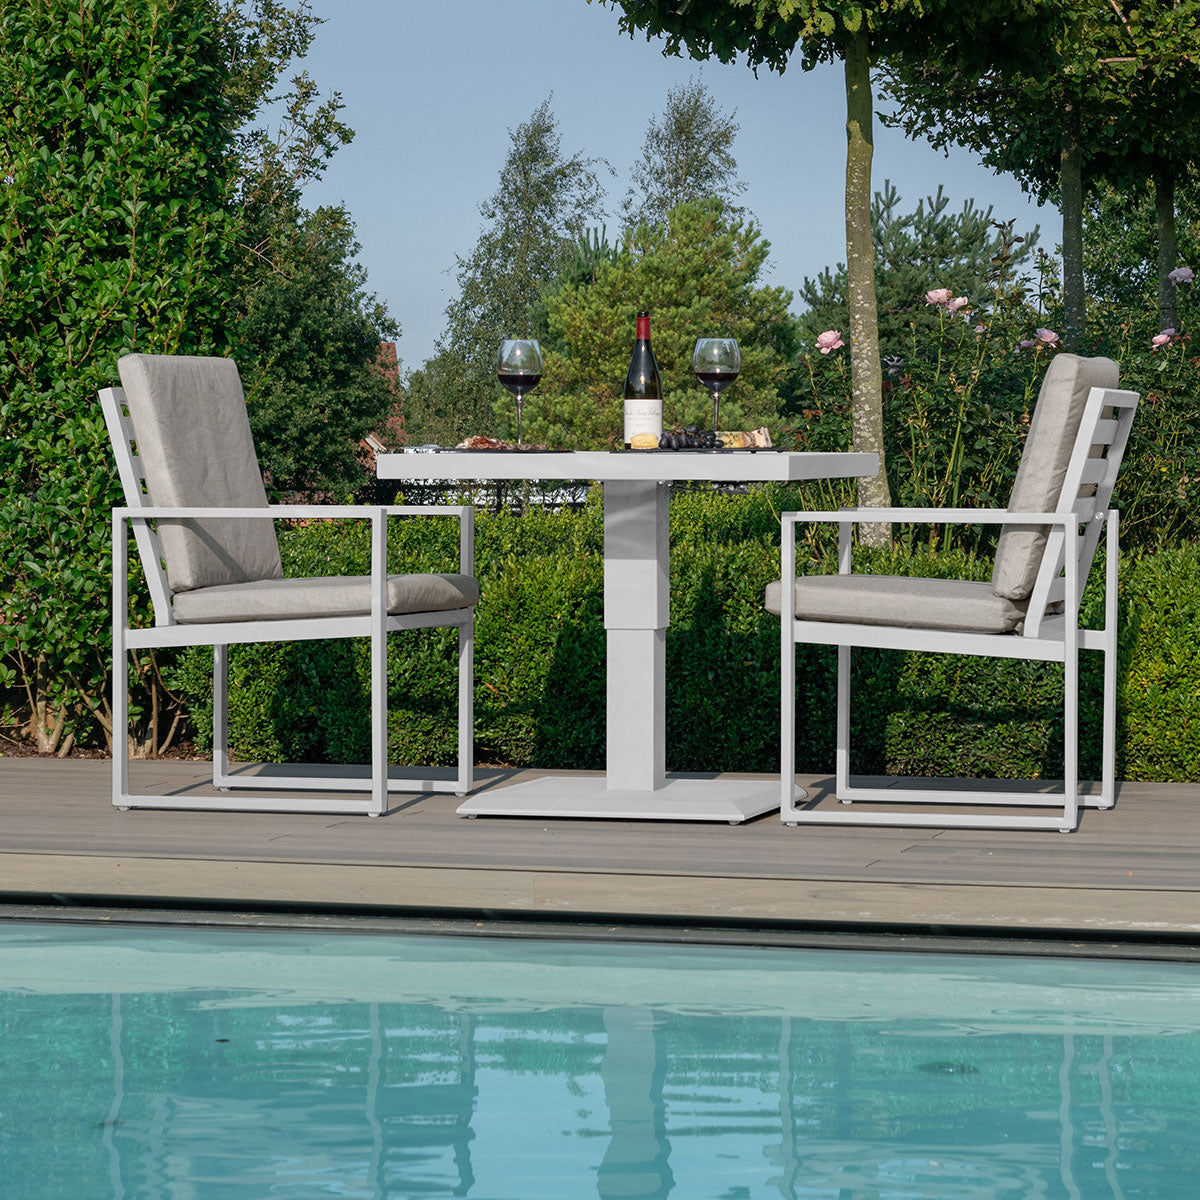 Image of Maze Lounge Outdoor Furniture Amalfi White 3 Piece Bistro Set with Rising Table